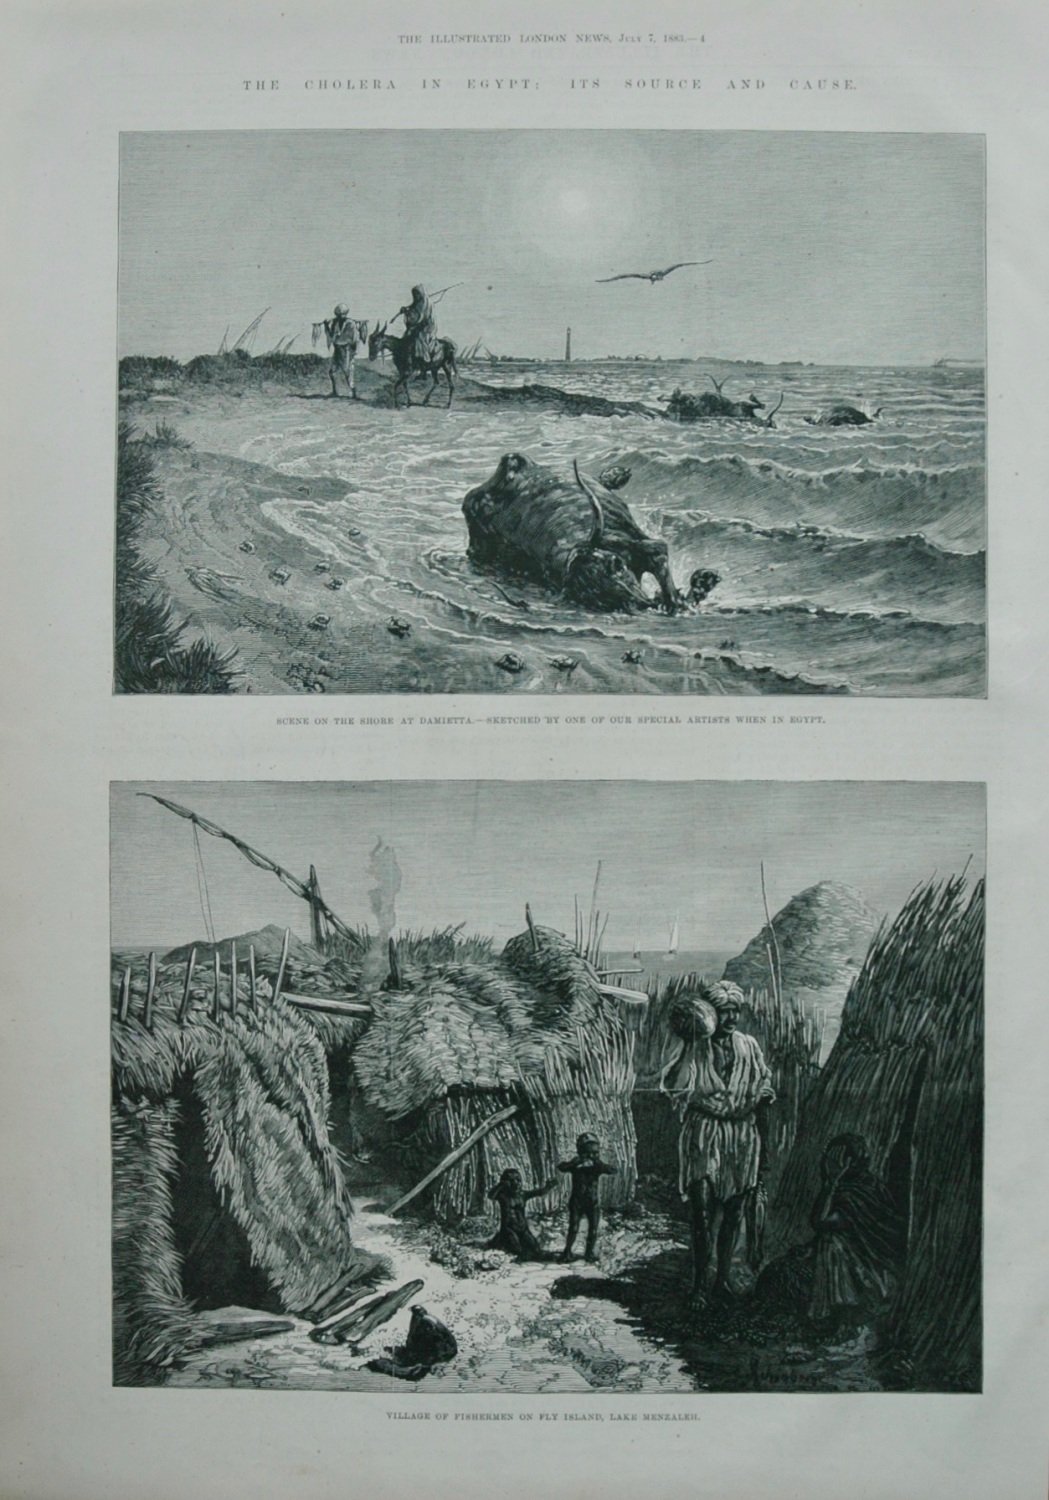 The Cholera in Egypt - 1883